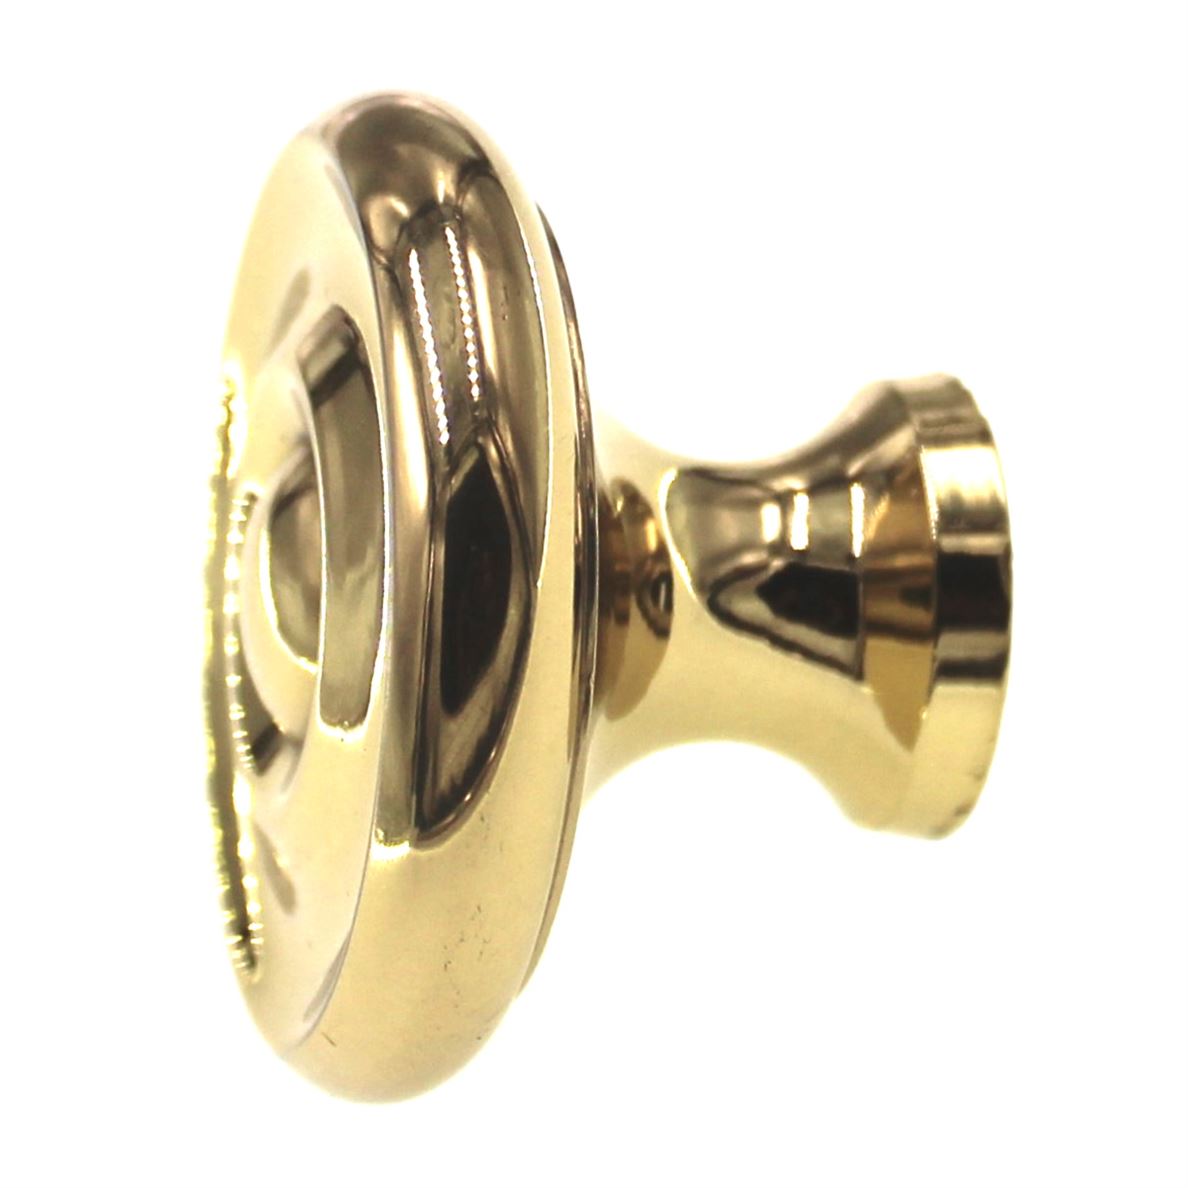 Amerock Colonial Polished Brass Solid Brass 1 1/2" Round Cabinet Knob BP1431-3